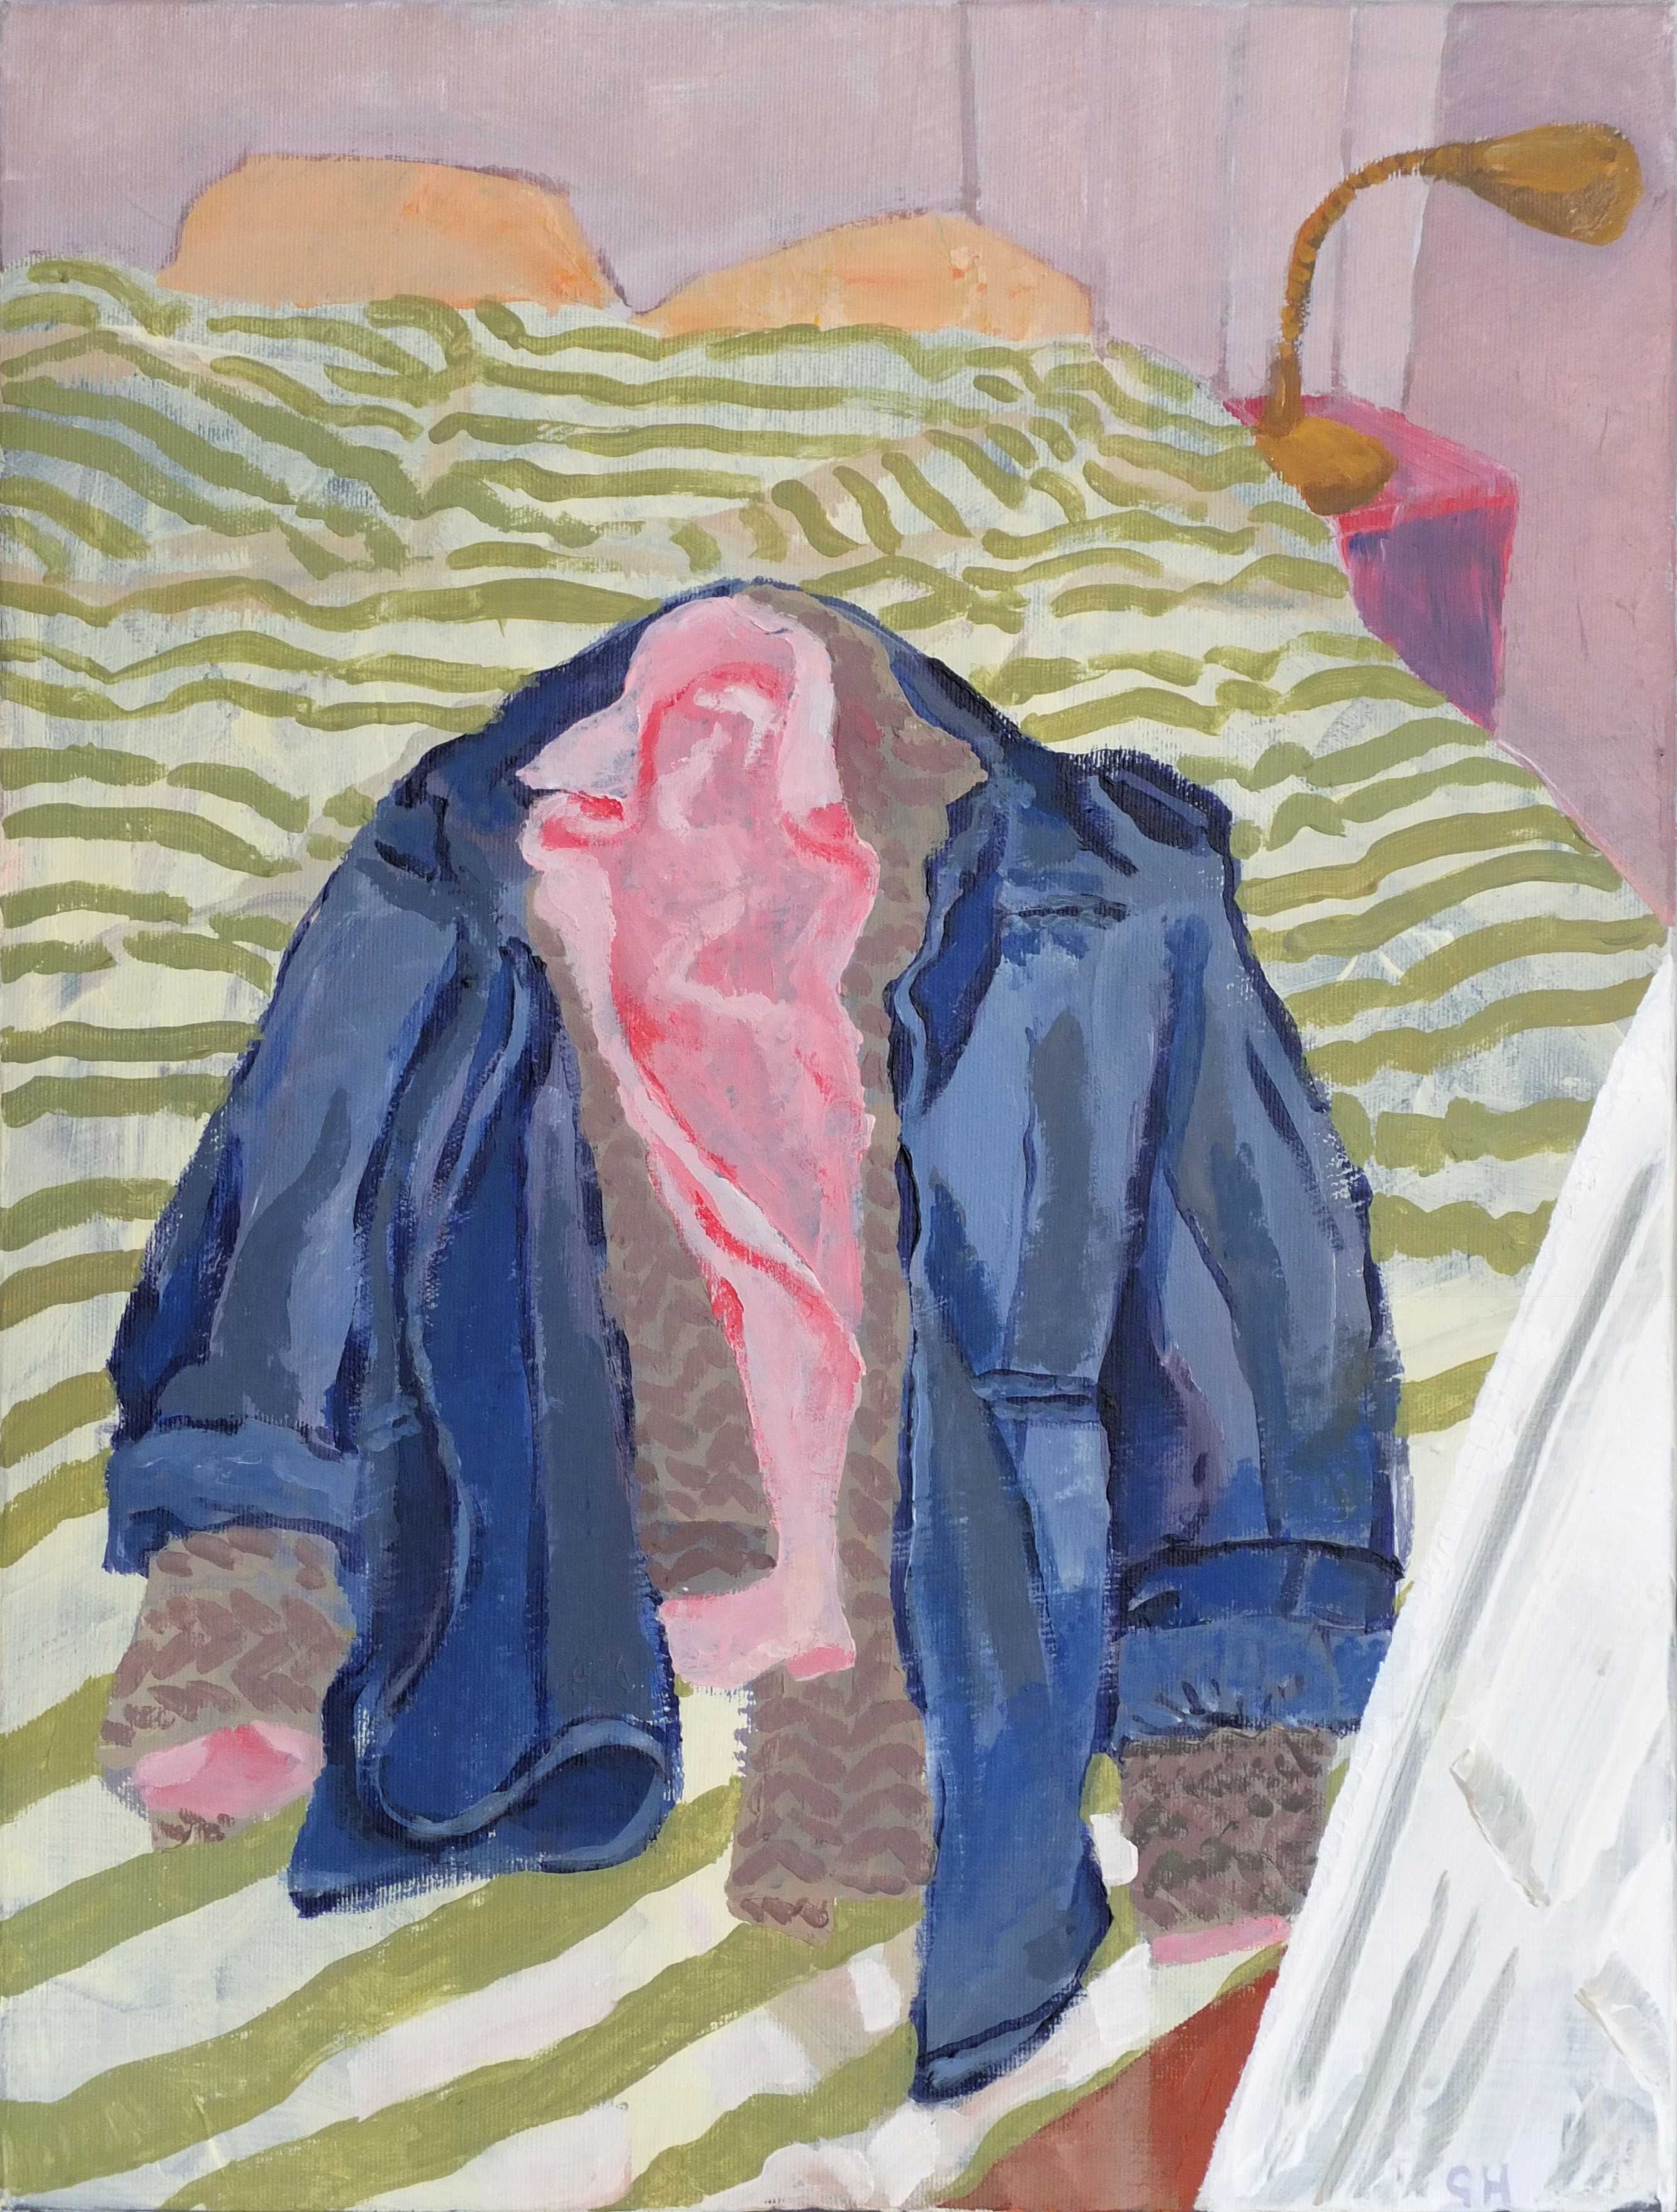 Jacket on the Striped Bed